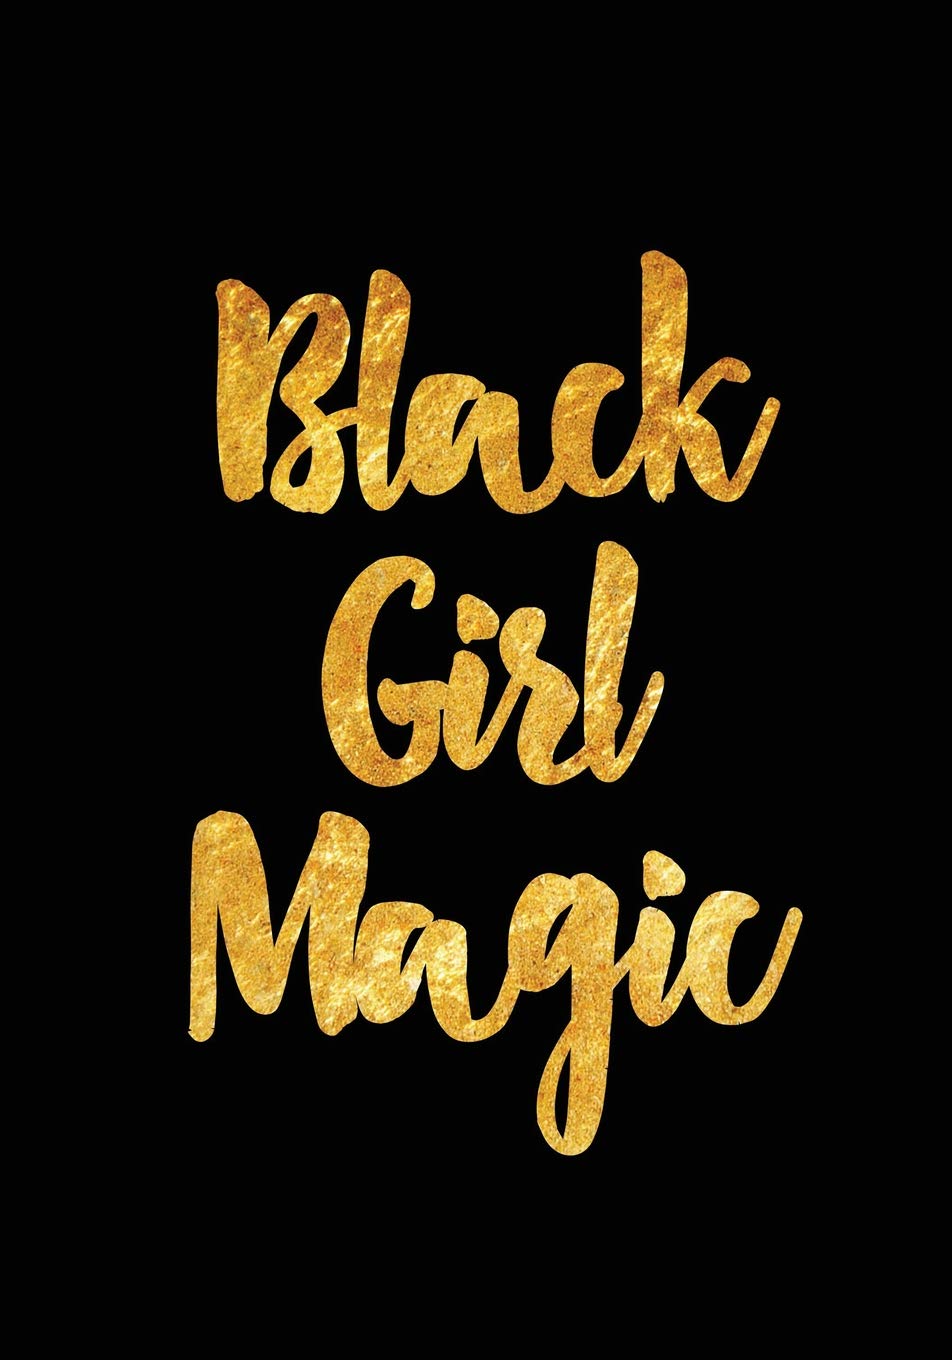 Black Girl Magic: Gold Textured Notebook Journal Diary, African American Notebook, Black History Month Journal, Black Pride Notebook, Black Lives Matter Book, Melanin Notebook: For Everyone, Journals: Books